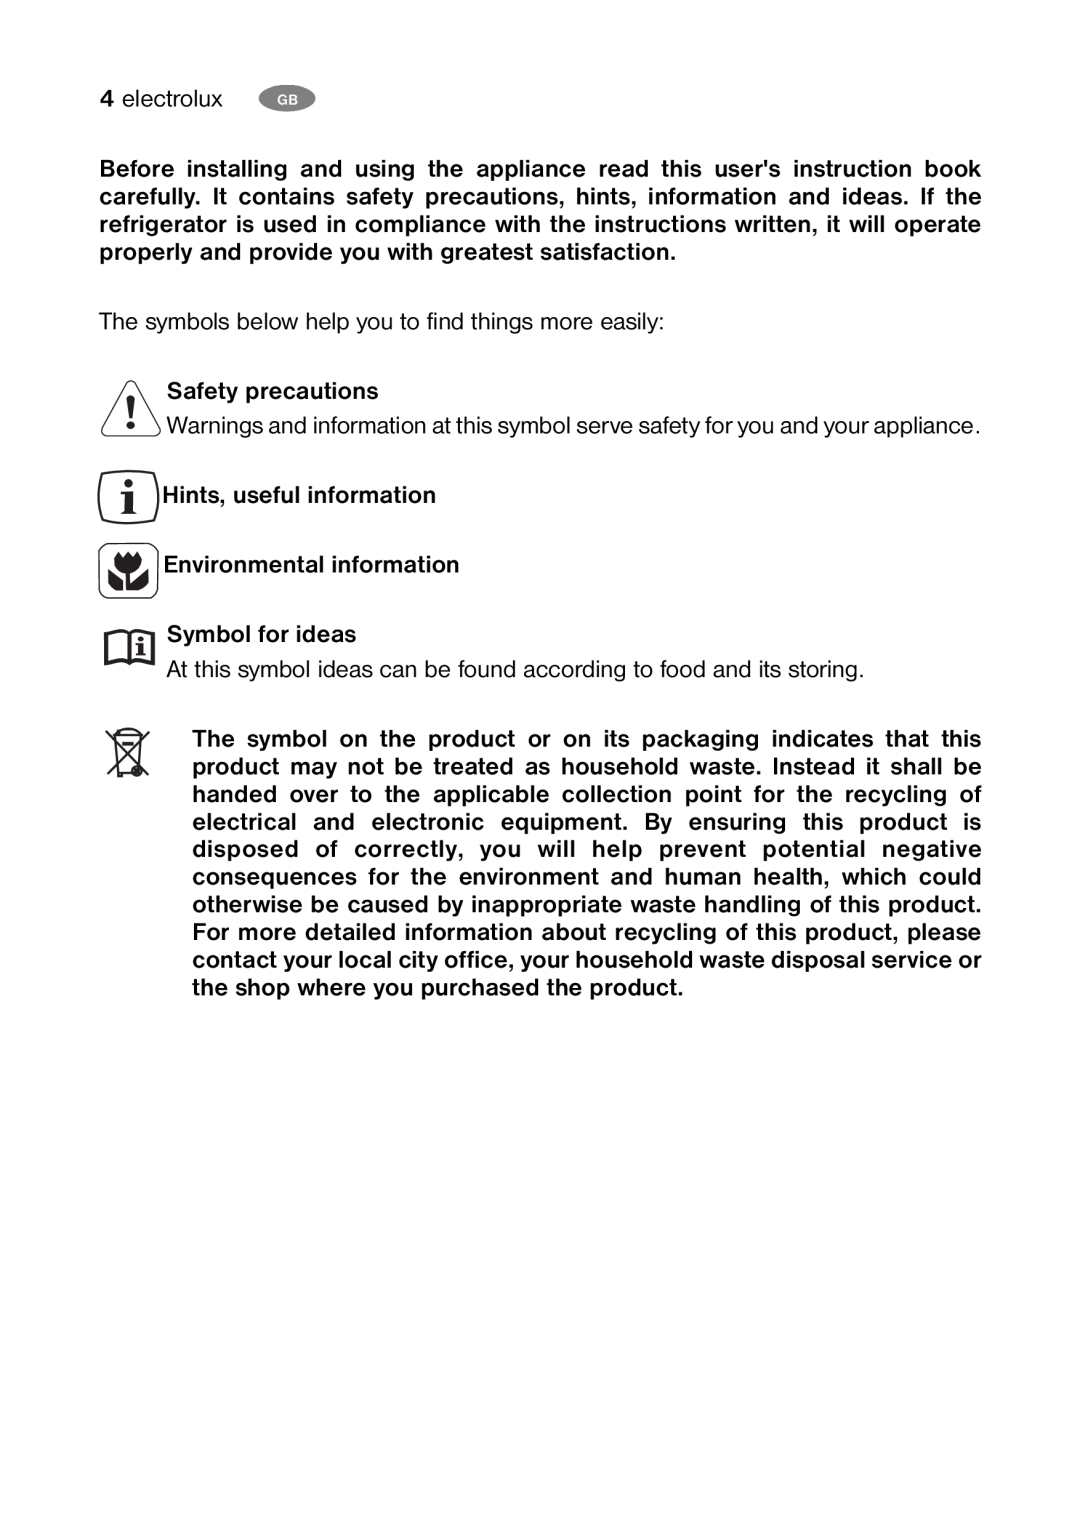 Electrolux ENB32000W Safety precautions, Hints, useful information Environmental information Symbol for ideas, electrolux 